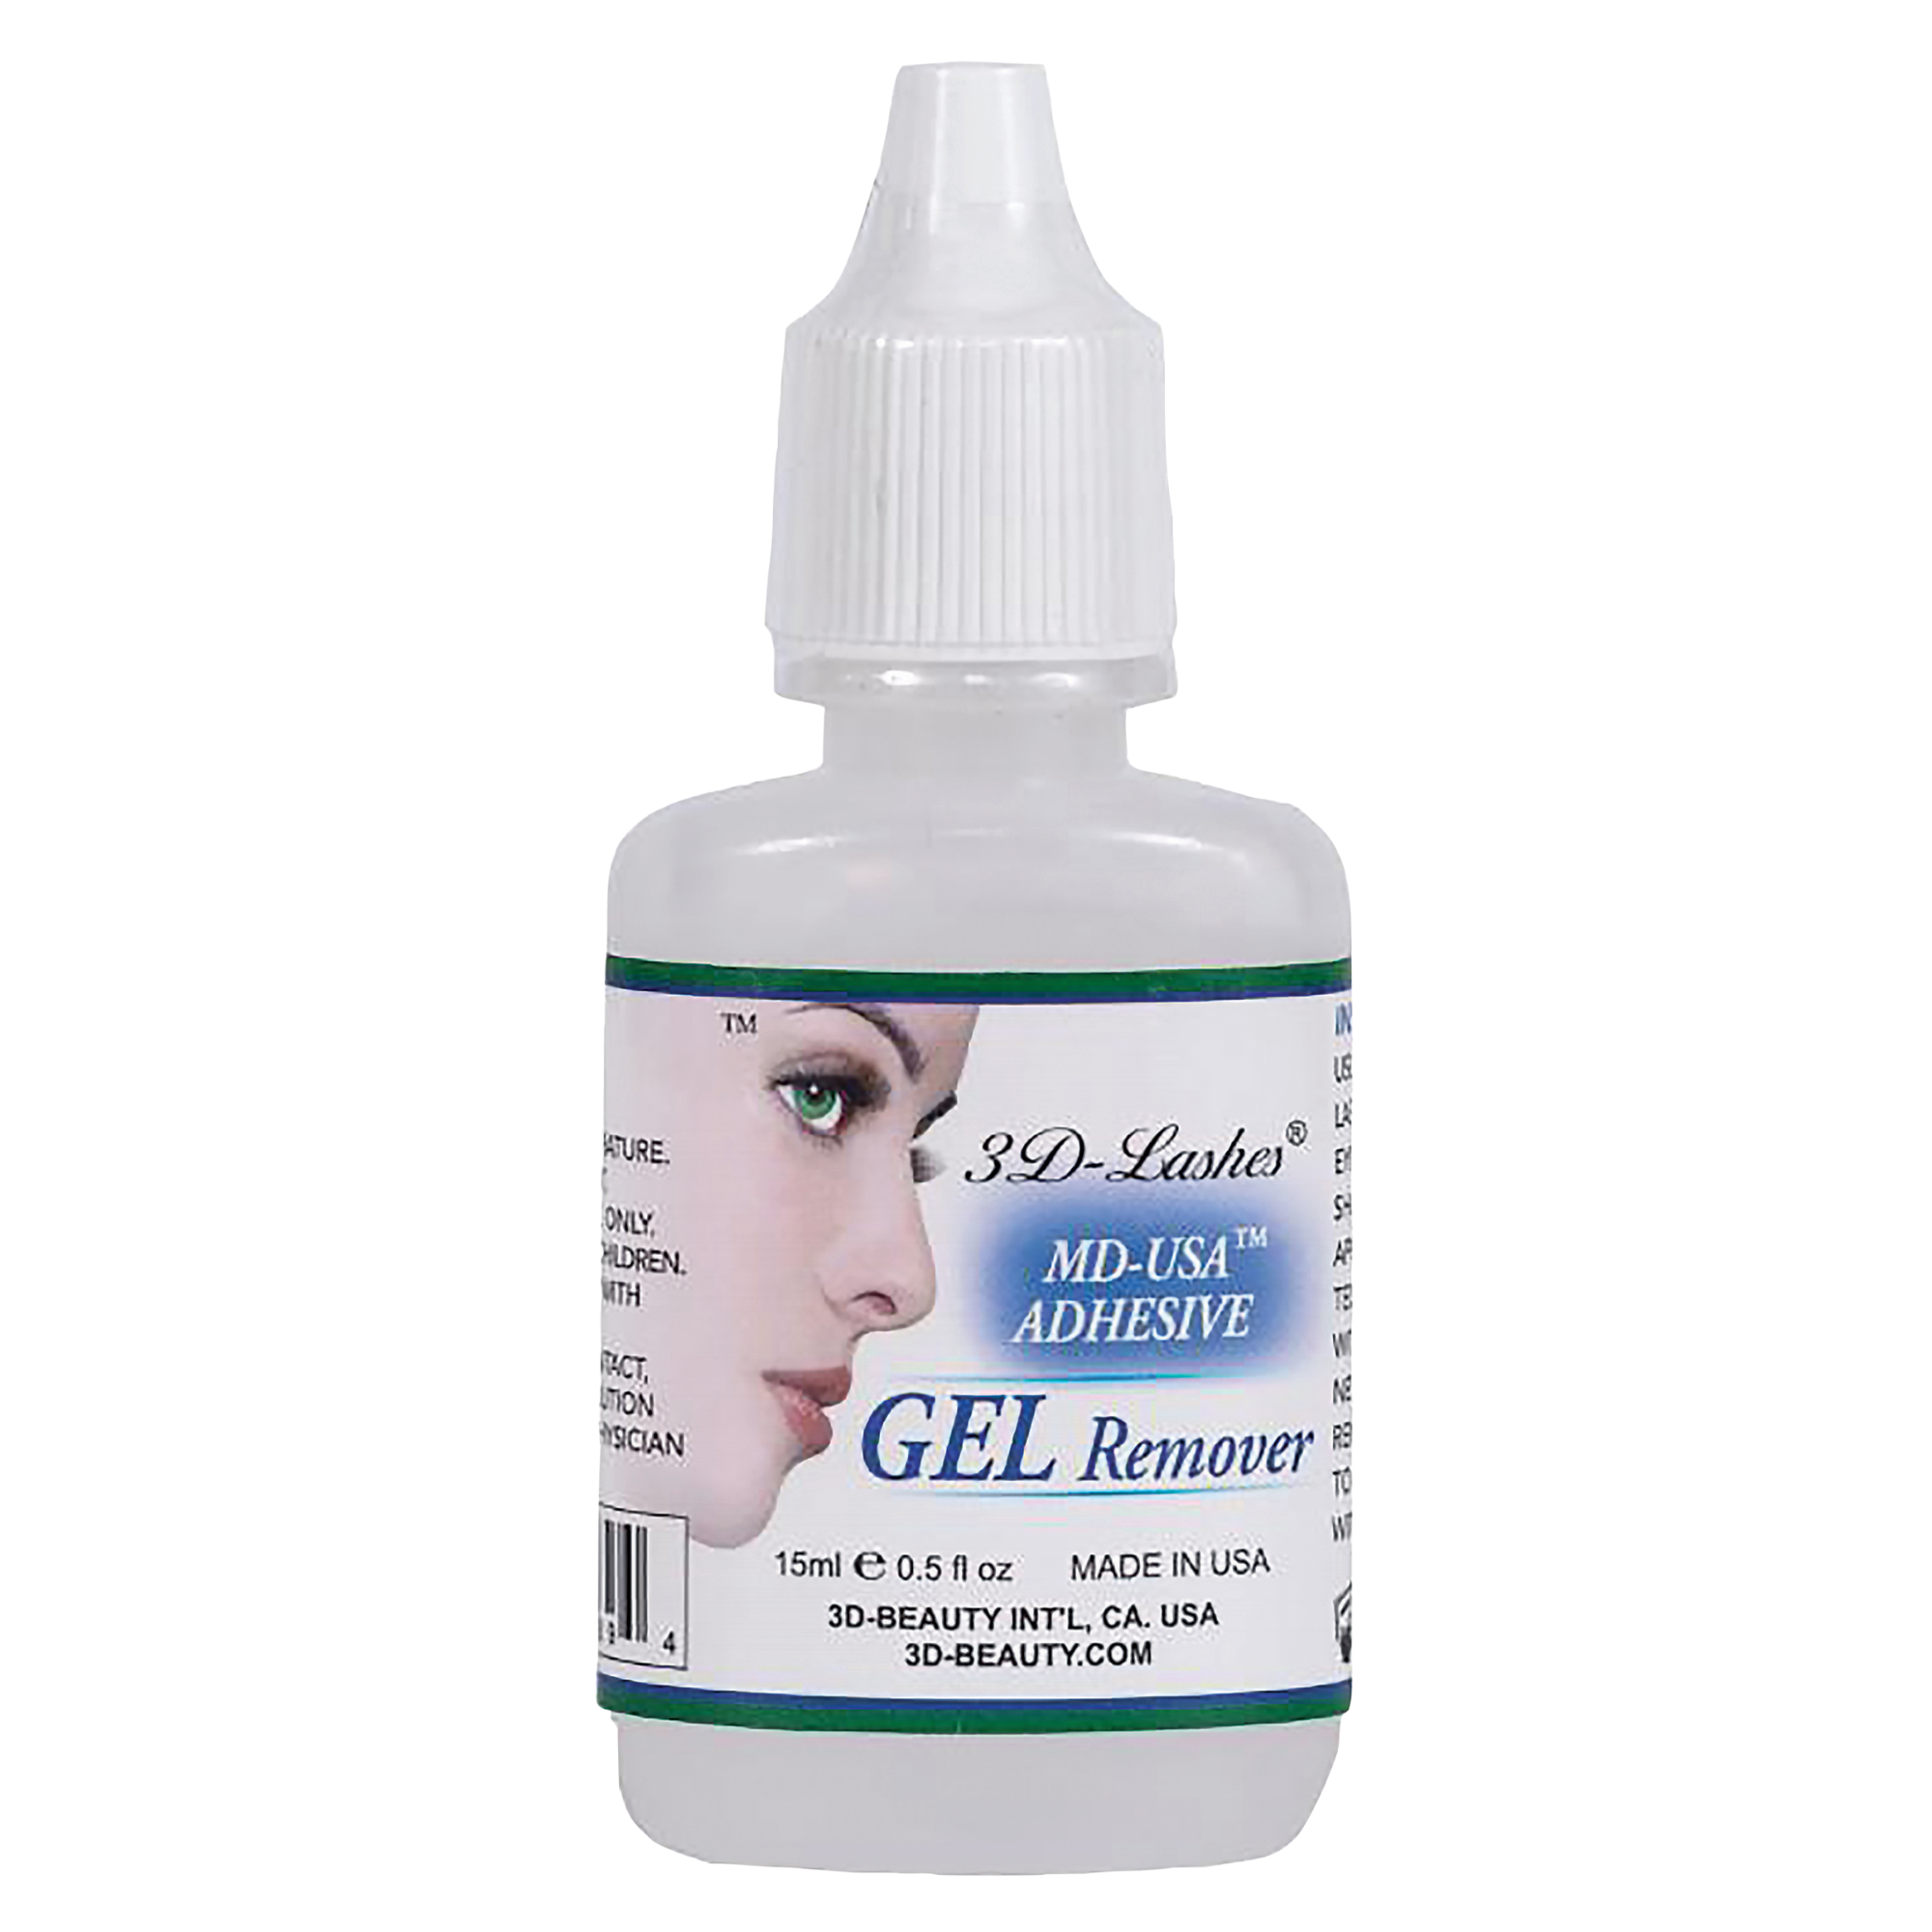 Adhesive Gel Remover